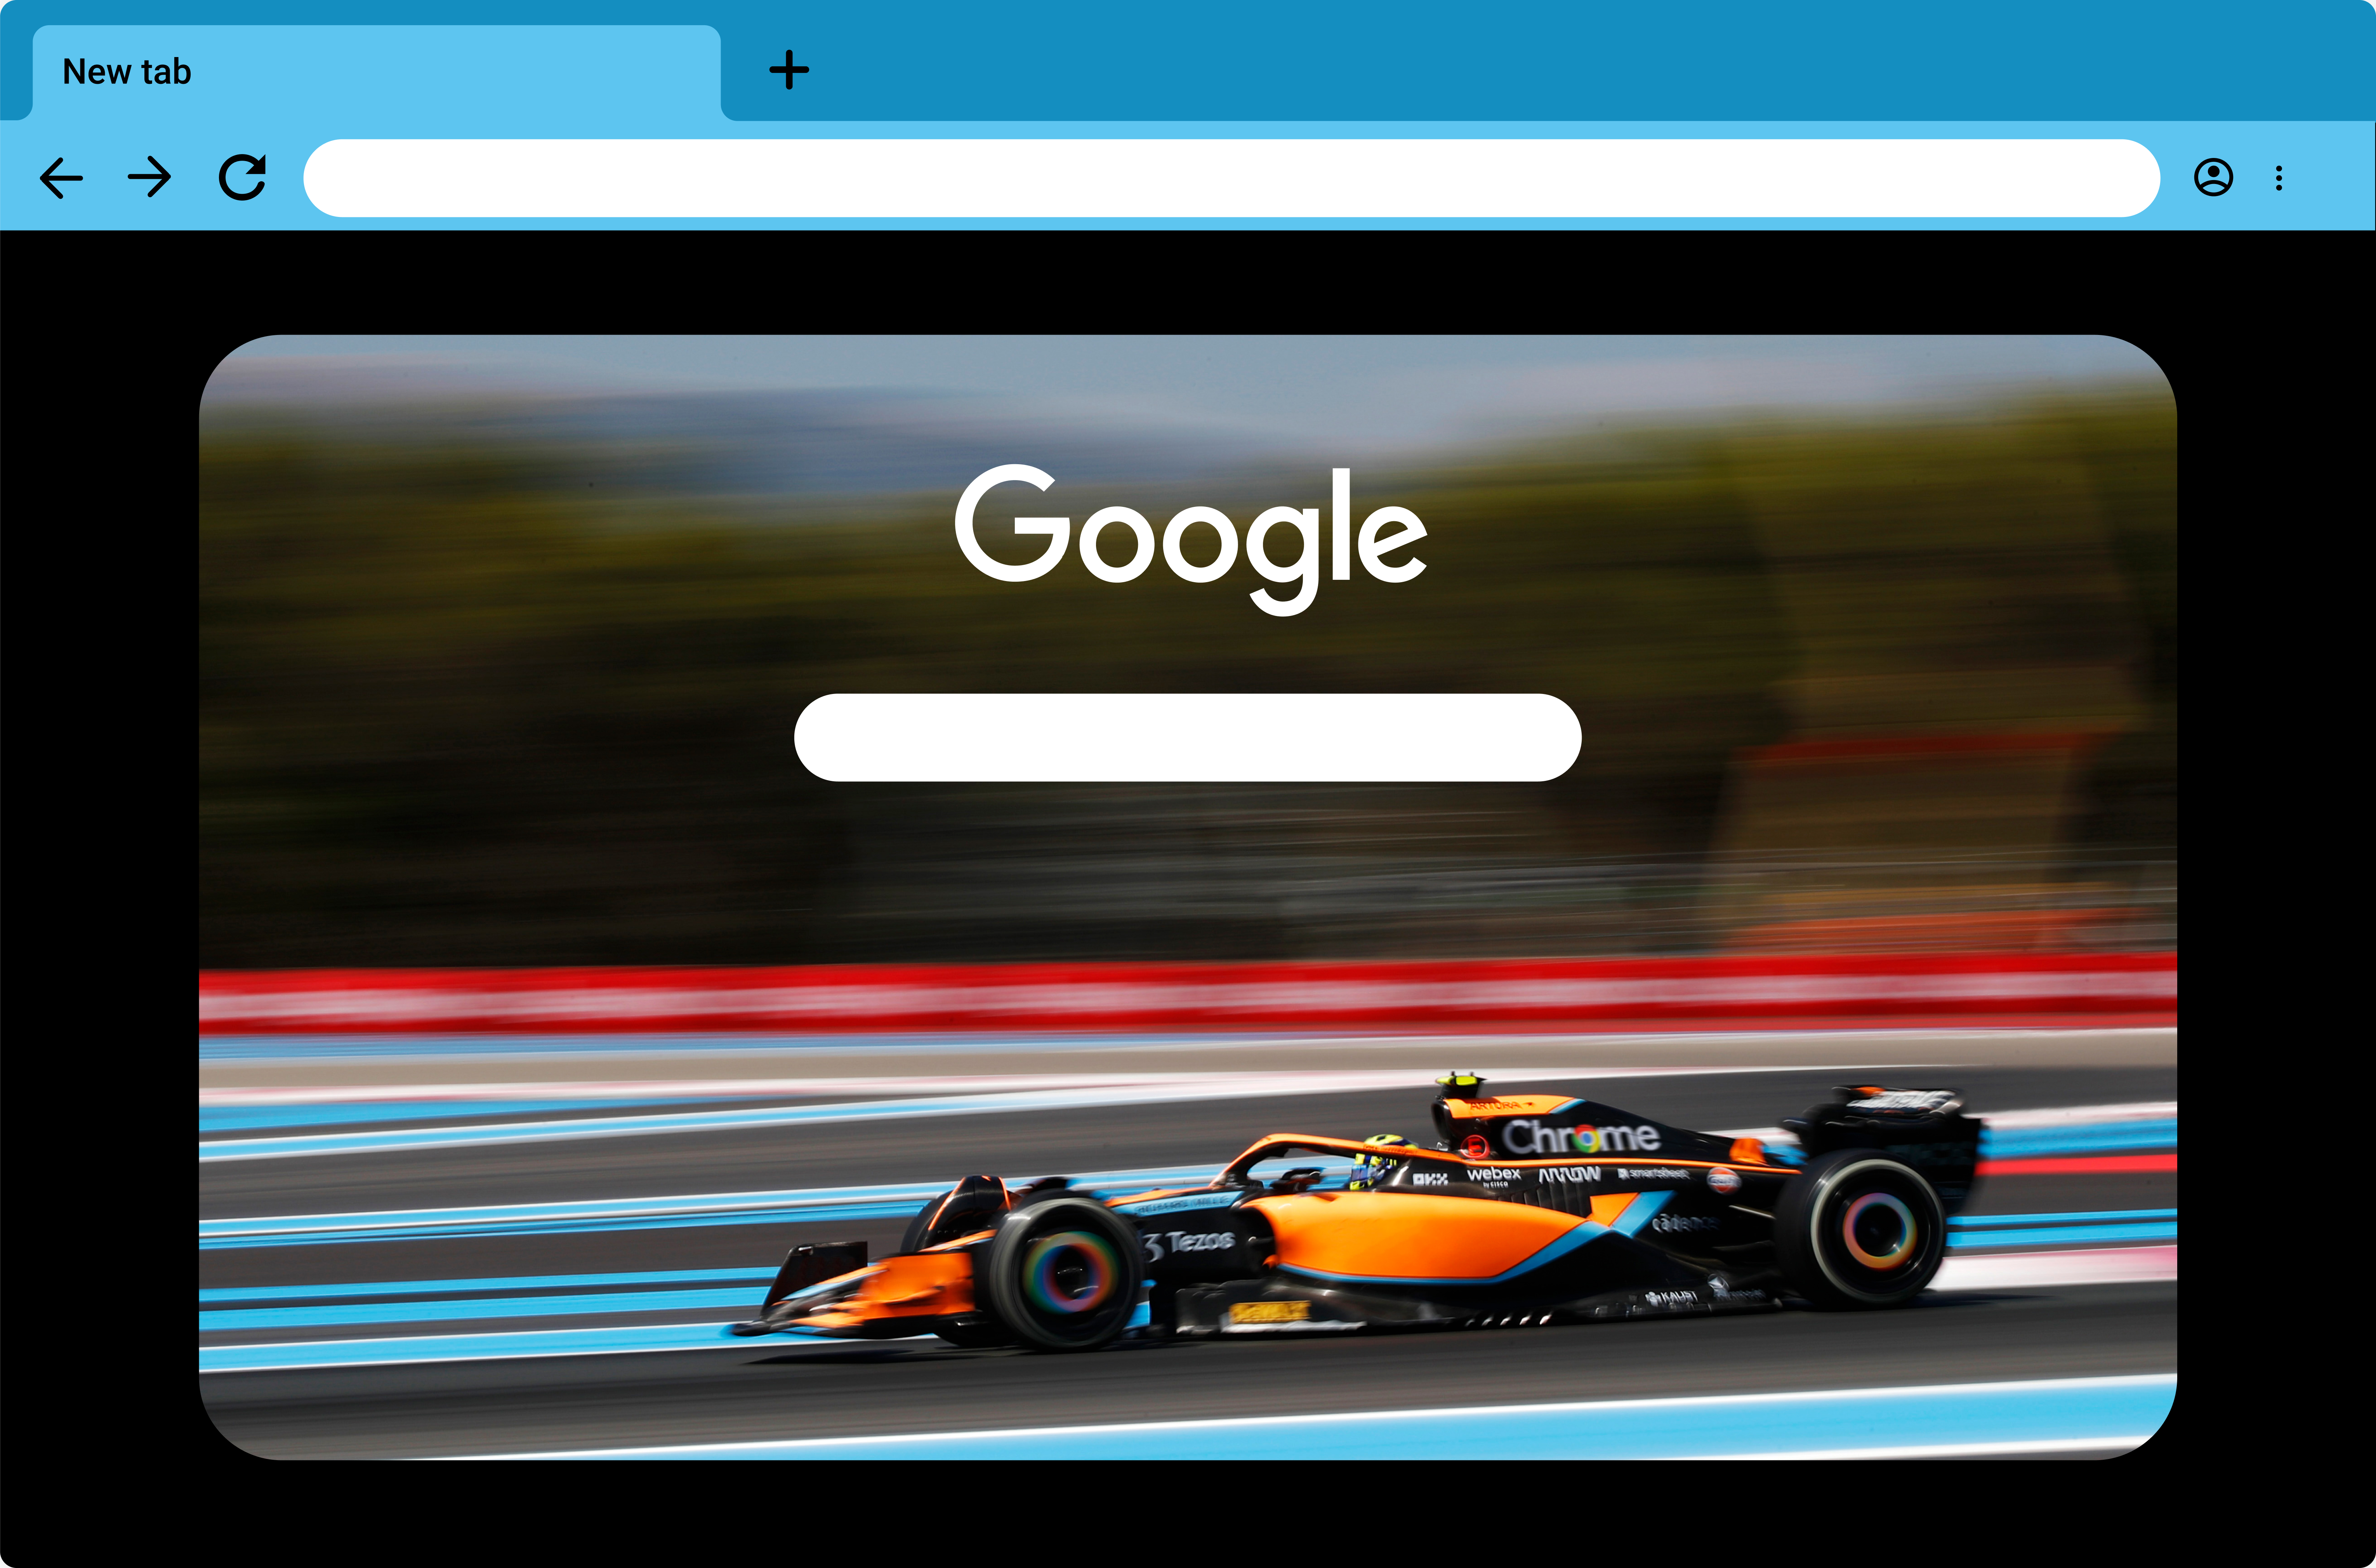 Test drive new McLaren Formula 1 themes in your Chrome browser